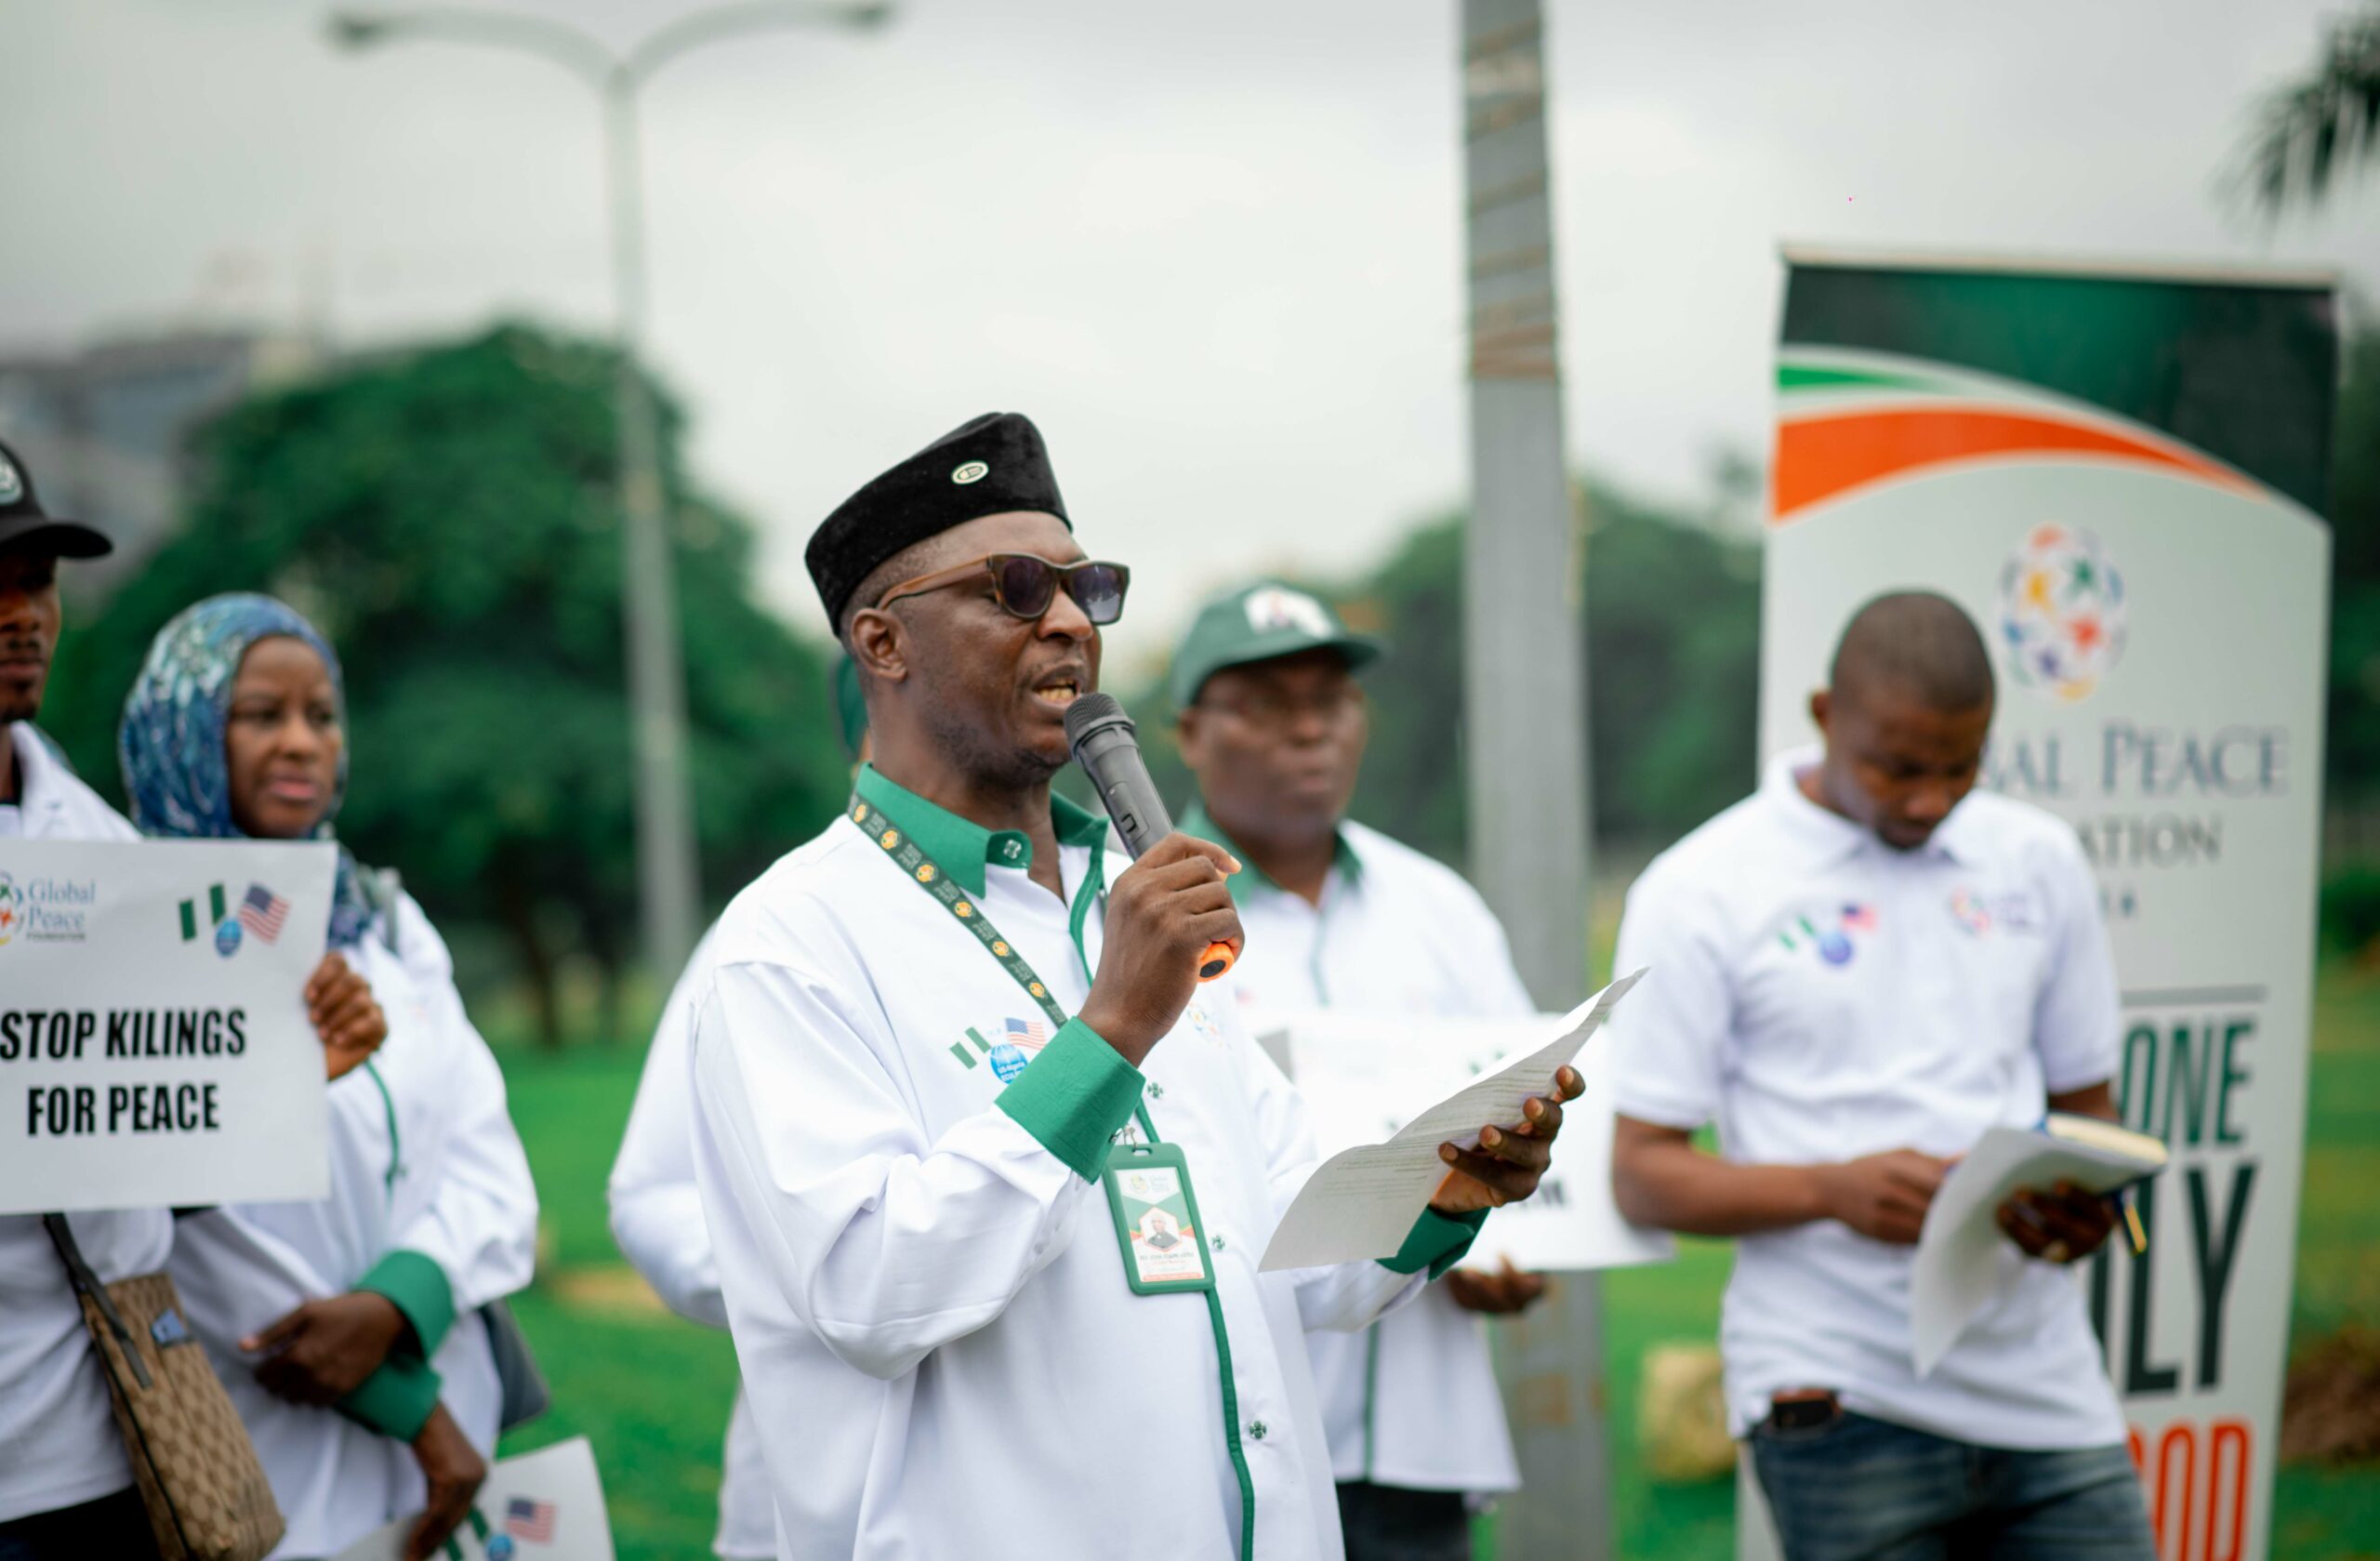 Rev. Hayab speaks at International Day of Peace event in Nigeria